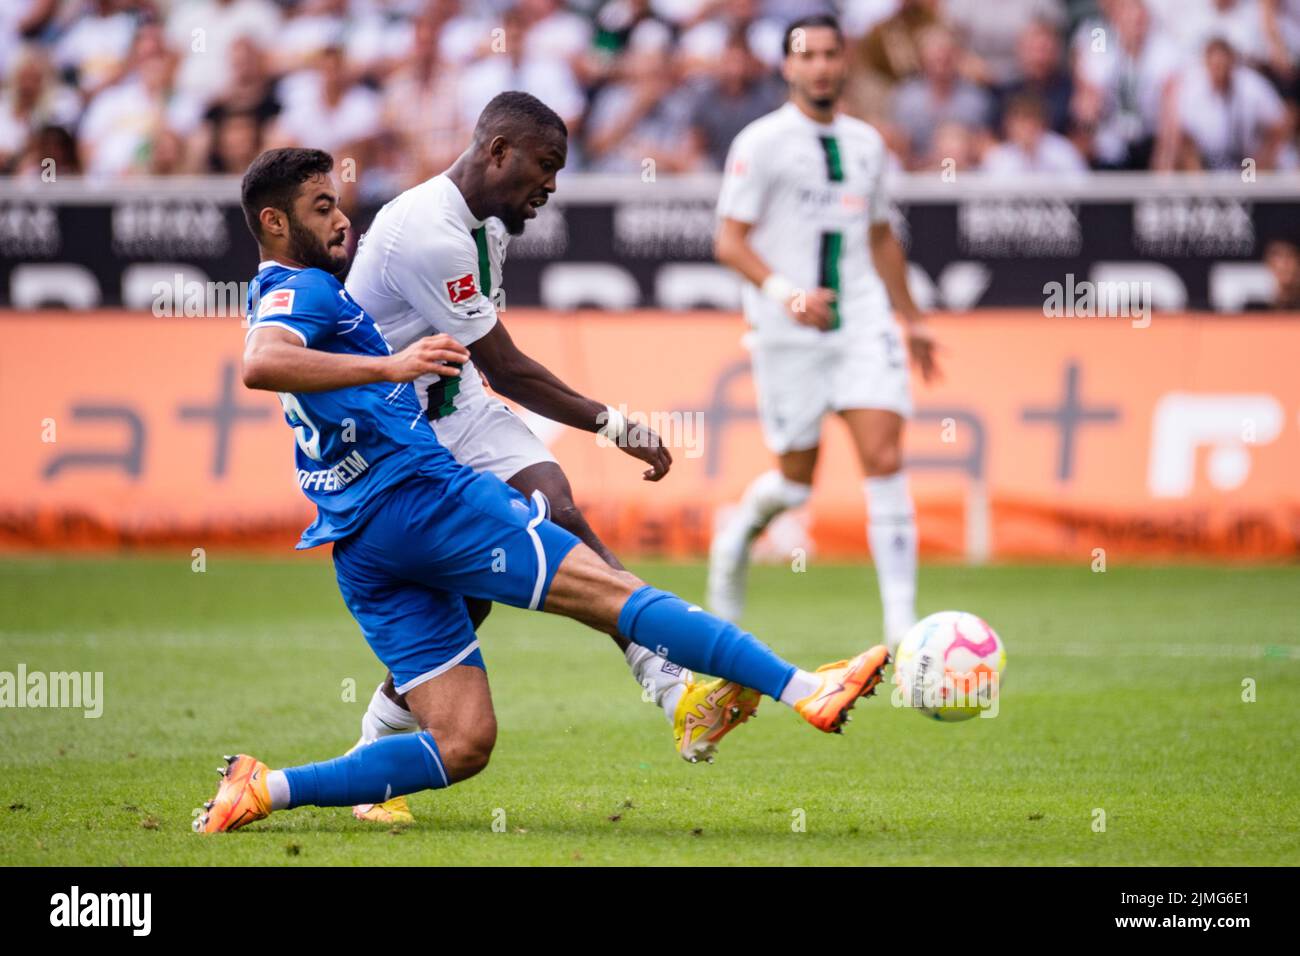 06 August 2022, North Rhine-Westphalia, Mönchengladbach: Soccer: Bundesliga, Borussia Mönchengladbach - TSG 1899 Hoffenheim, Matchday 1, Borussia-Park. Gladbach's Marcus Thuram (r) scores against Hoffenheim's Ozan Kabak to make it 2:1. Photo: Marius Becker/dpa - IMPORTANT NOTE: In accordance with the requirements of the DFL Deutsche Fußball Liga and the DFB Deutscher Fußball-Bund, it is prohibited to use or have used photographs taken in the stadium and/or of the match in the form of sequence pictures and/or video-like photo series. Stock Photo